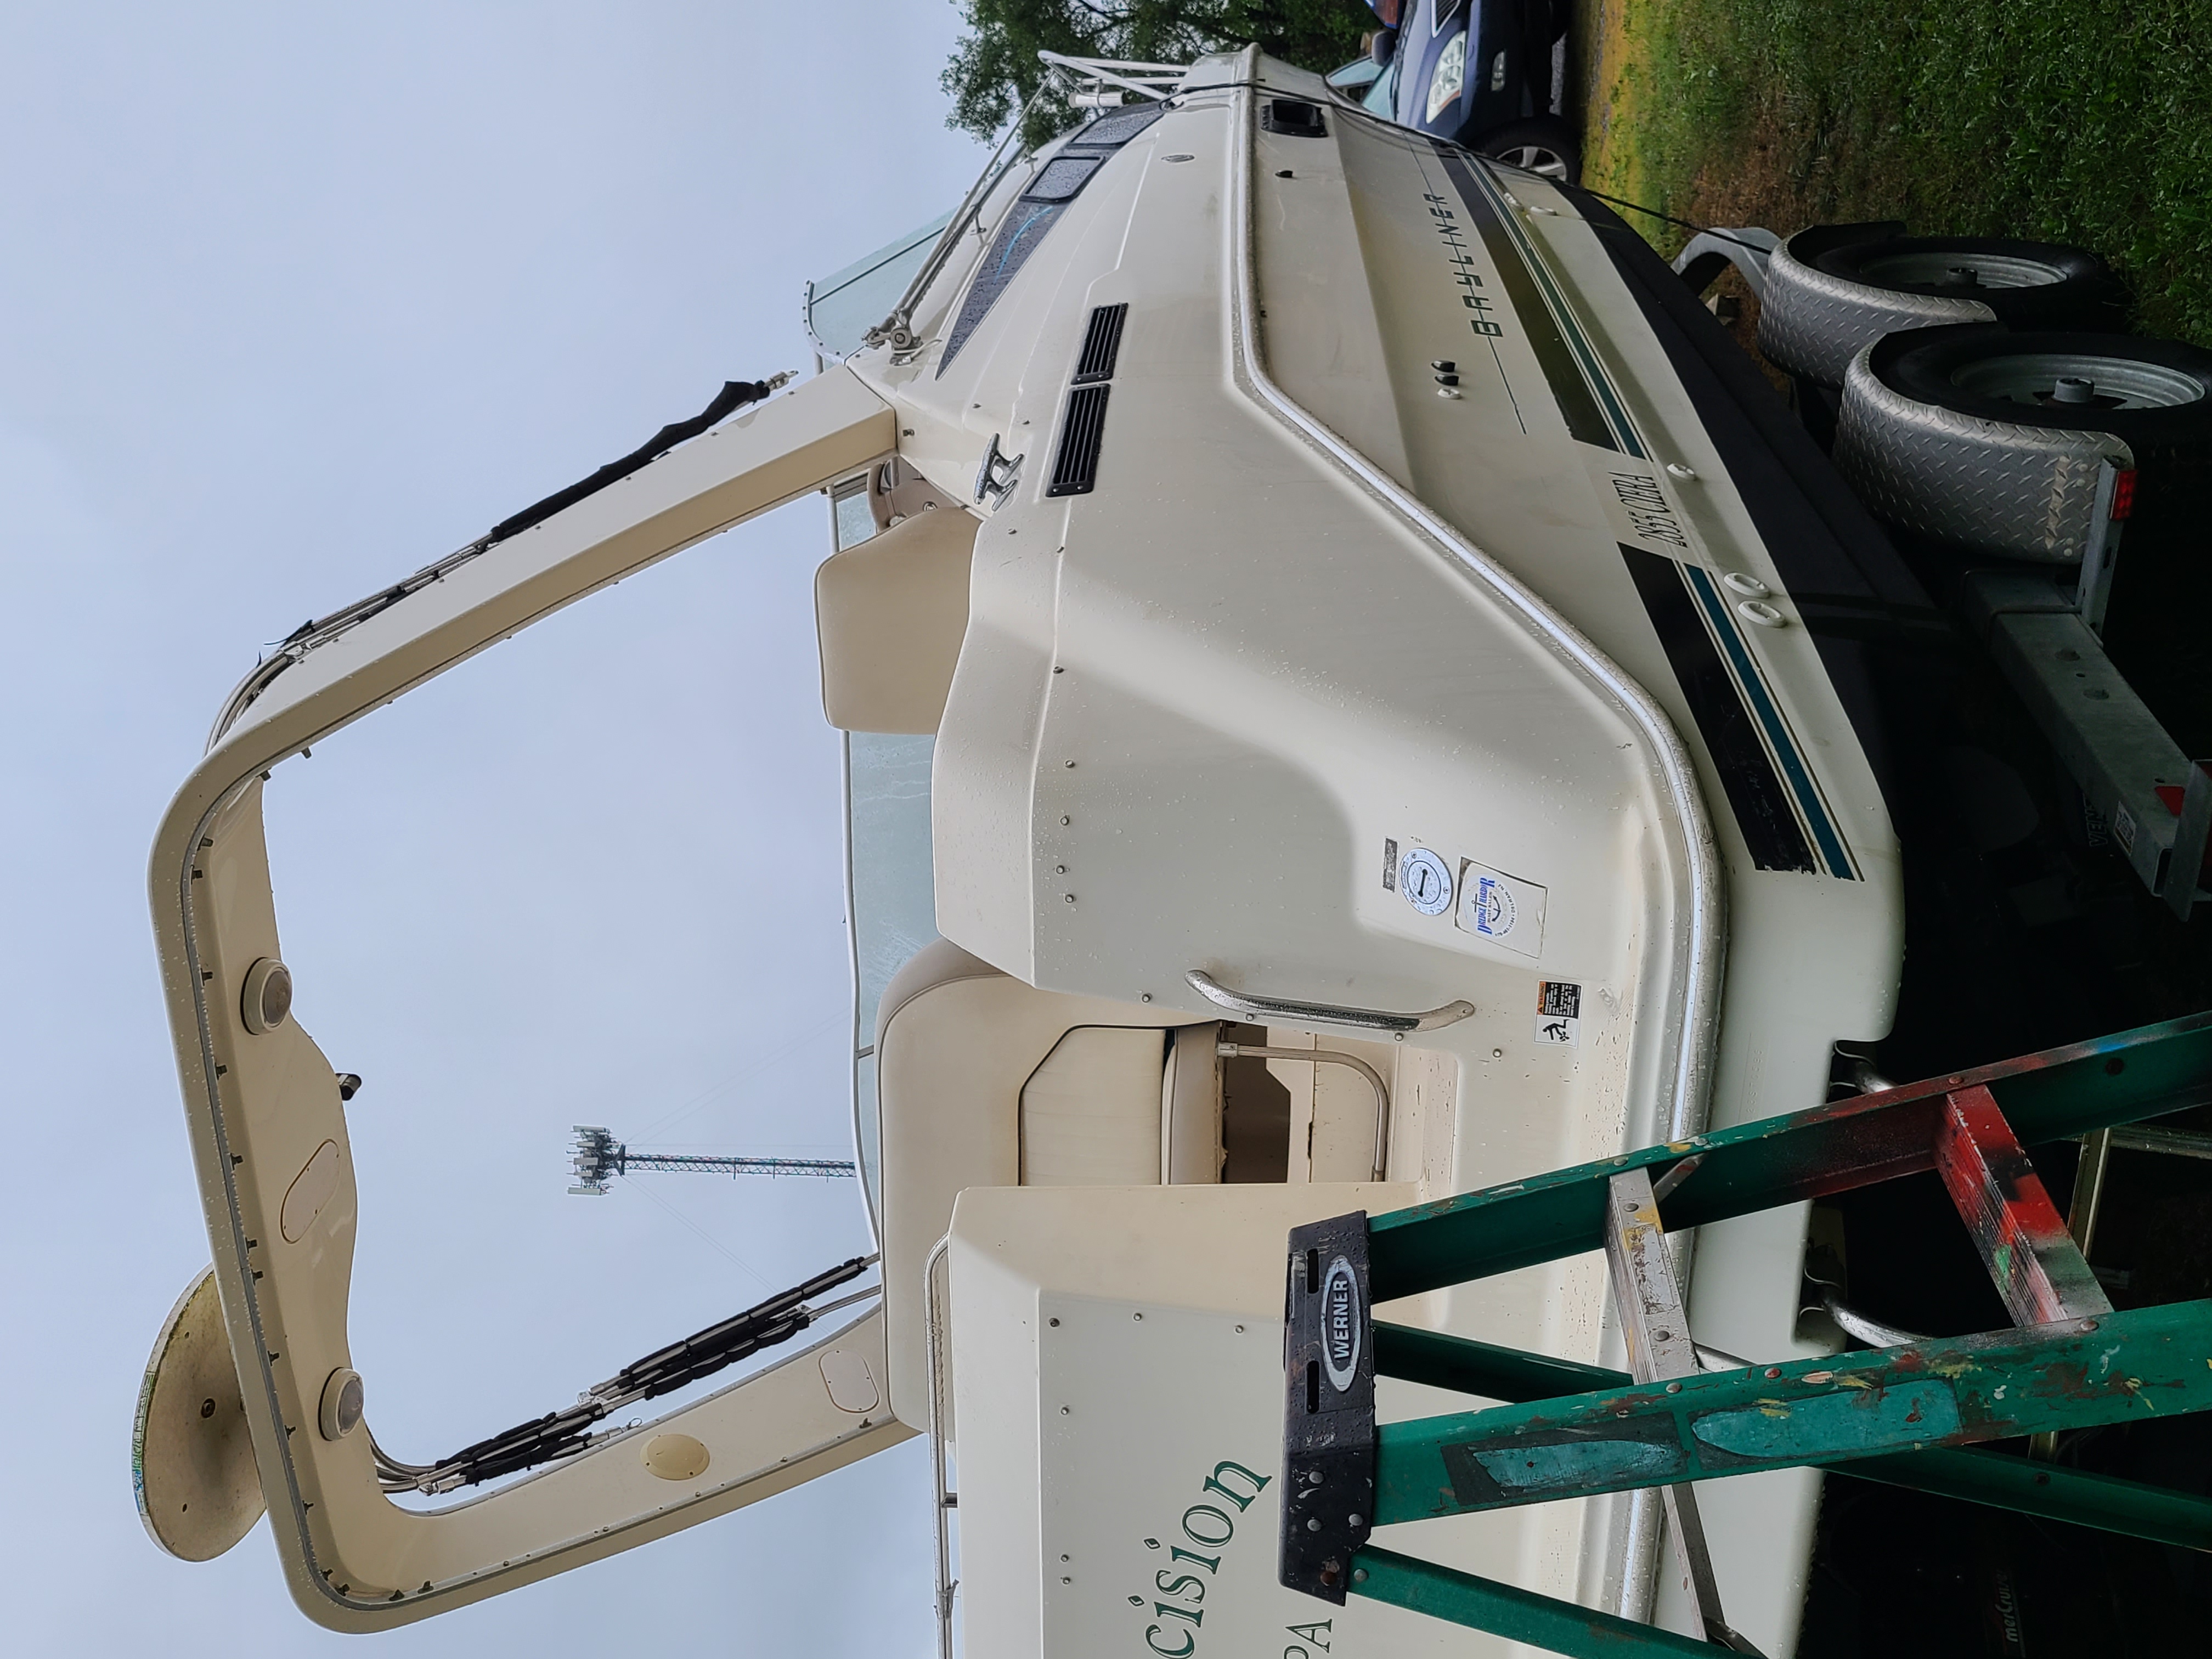 1995 Bayliner Ciera 2855 Power boat for sale in Hallam, PA - image 3 